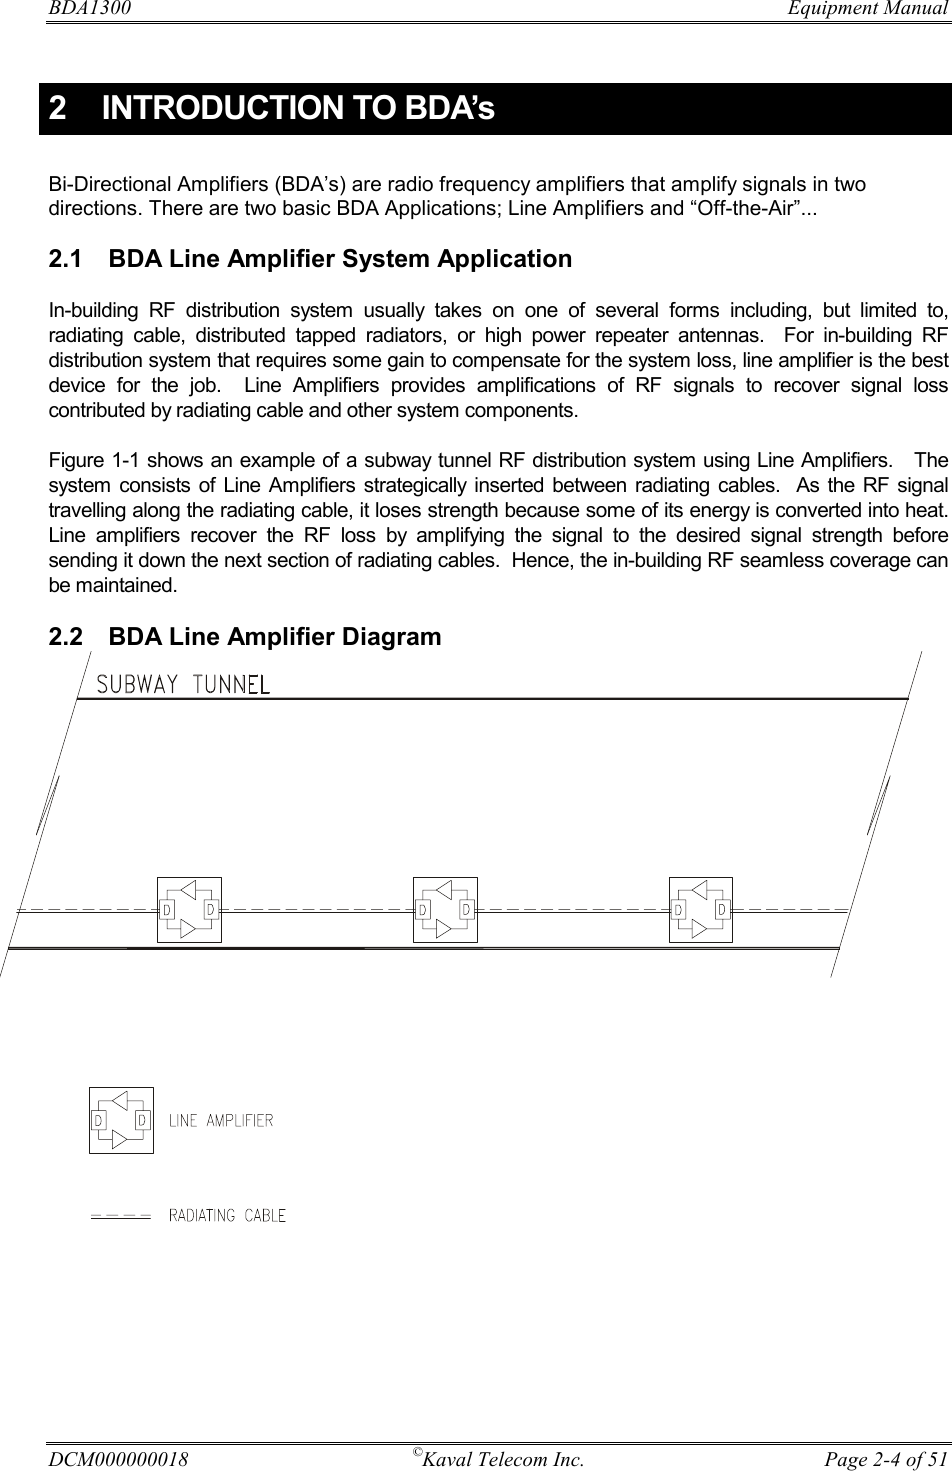 BDA1300     Equipment Manual DCM000000018  ©Kaval Telecom Inc.  Page 2-4 of 51  2   INTRODUCTION TO BDA’s  Bi-Directional Amplifiers (BDA’s) are radio frequency amplifiers that amplify signals in two directions. There are two basic BDA Applications; Line Amplifiers and “Off-the-Air”...  2.1  BDA Line Amplifier System Application  In-building RF distribution system usually takes on one of several forms including, but limited to, radiating cable, distributed tapped radiators, or high power repeater antennas.  For in-building RF distribution system that requires some gain to compensate for the system loss, line amplifier is the best device for the job.  Line Amplifiers provides amplifications of RF signals to recover signal loss contributed by radiating cable and other system components. Figure 1-1 shows an example of a subway tunnel RF distribution system using Line Amplifiers.   The system consists of Line Amplifiers strategically inserted between radiating cables.  As the RF signal travelling along the radiating cable, it loses strength because some of its energy is converted into heat.  Line amplifiers recover the RF loss by amplifying the signal to the desired signal strength before sending it down the next section of radiating cables.  Hence, the in-building RF seamless coverage can be maintained. 2.2  BDA Line Amplifier Diagram  